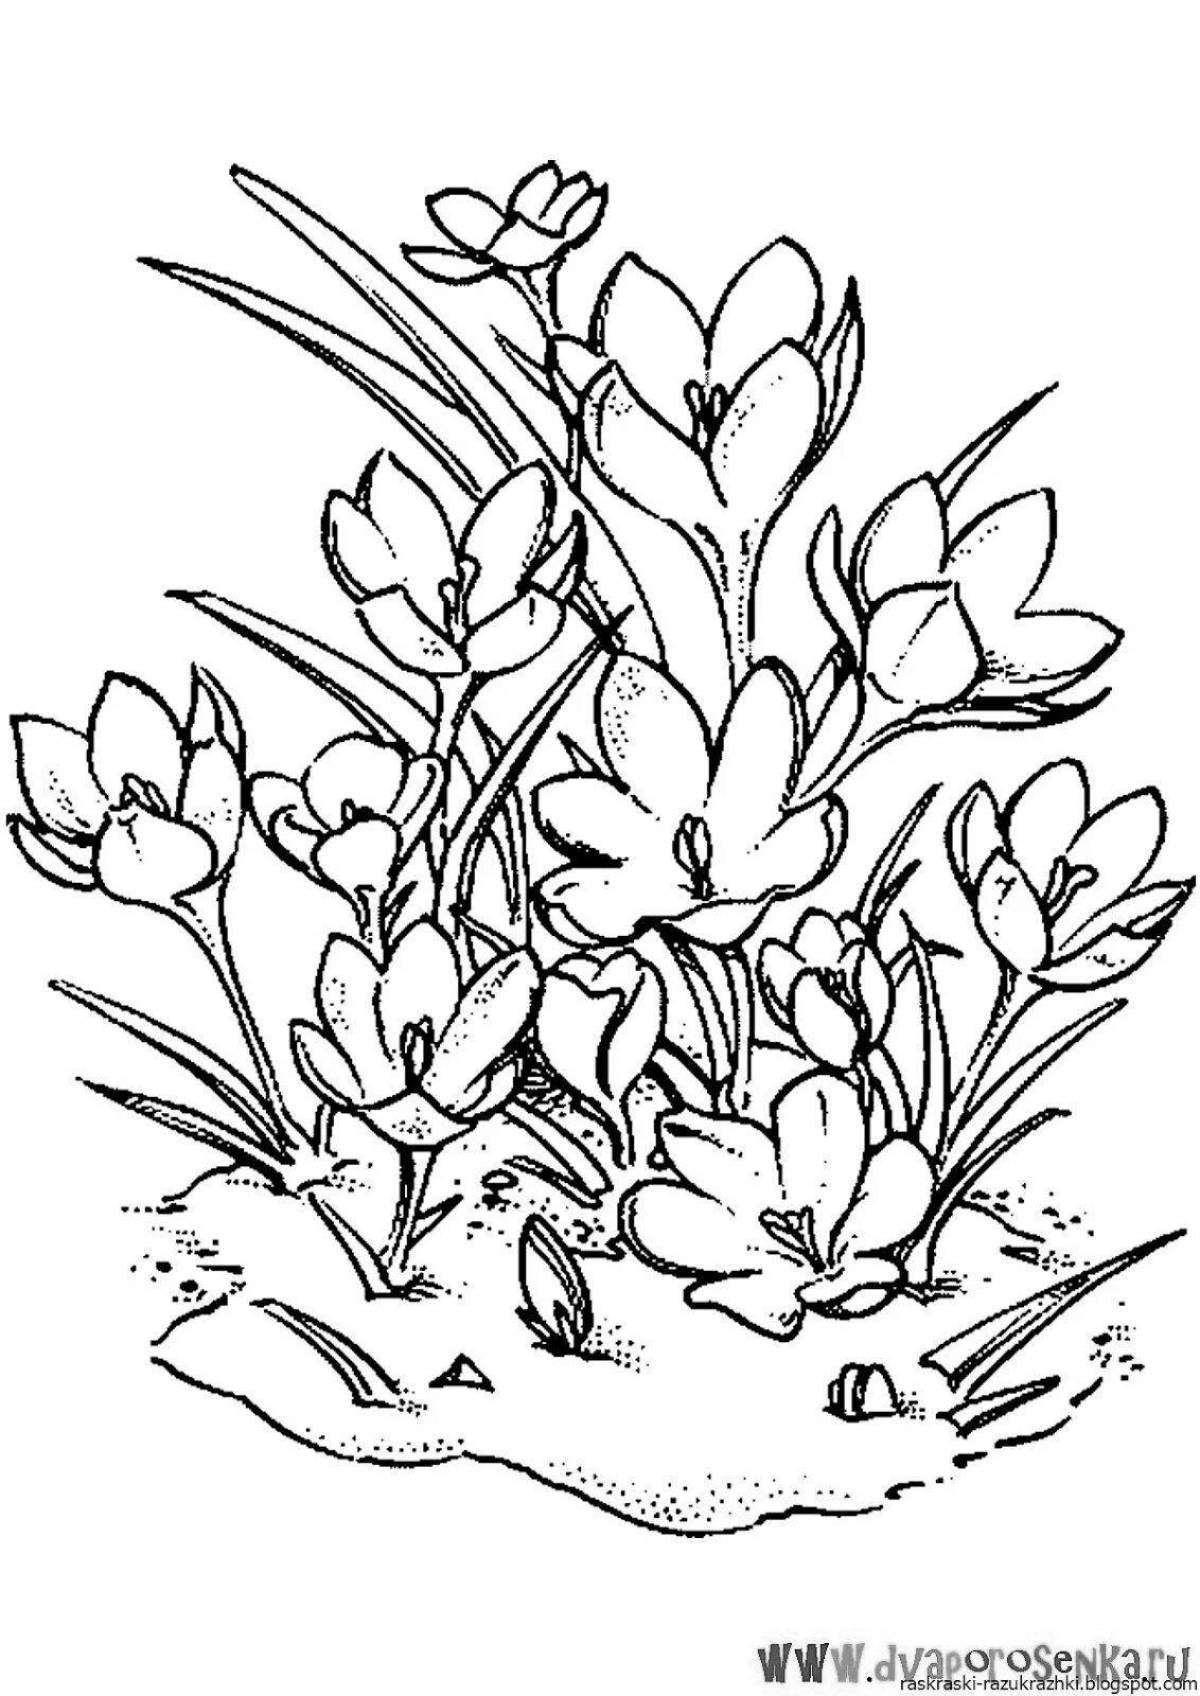 Cute snowdrops coloring pages for kids